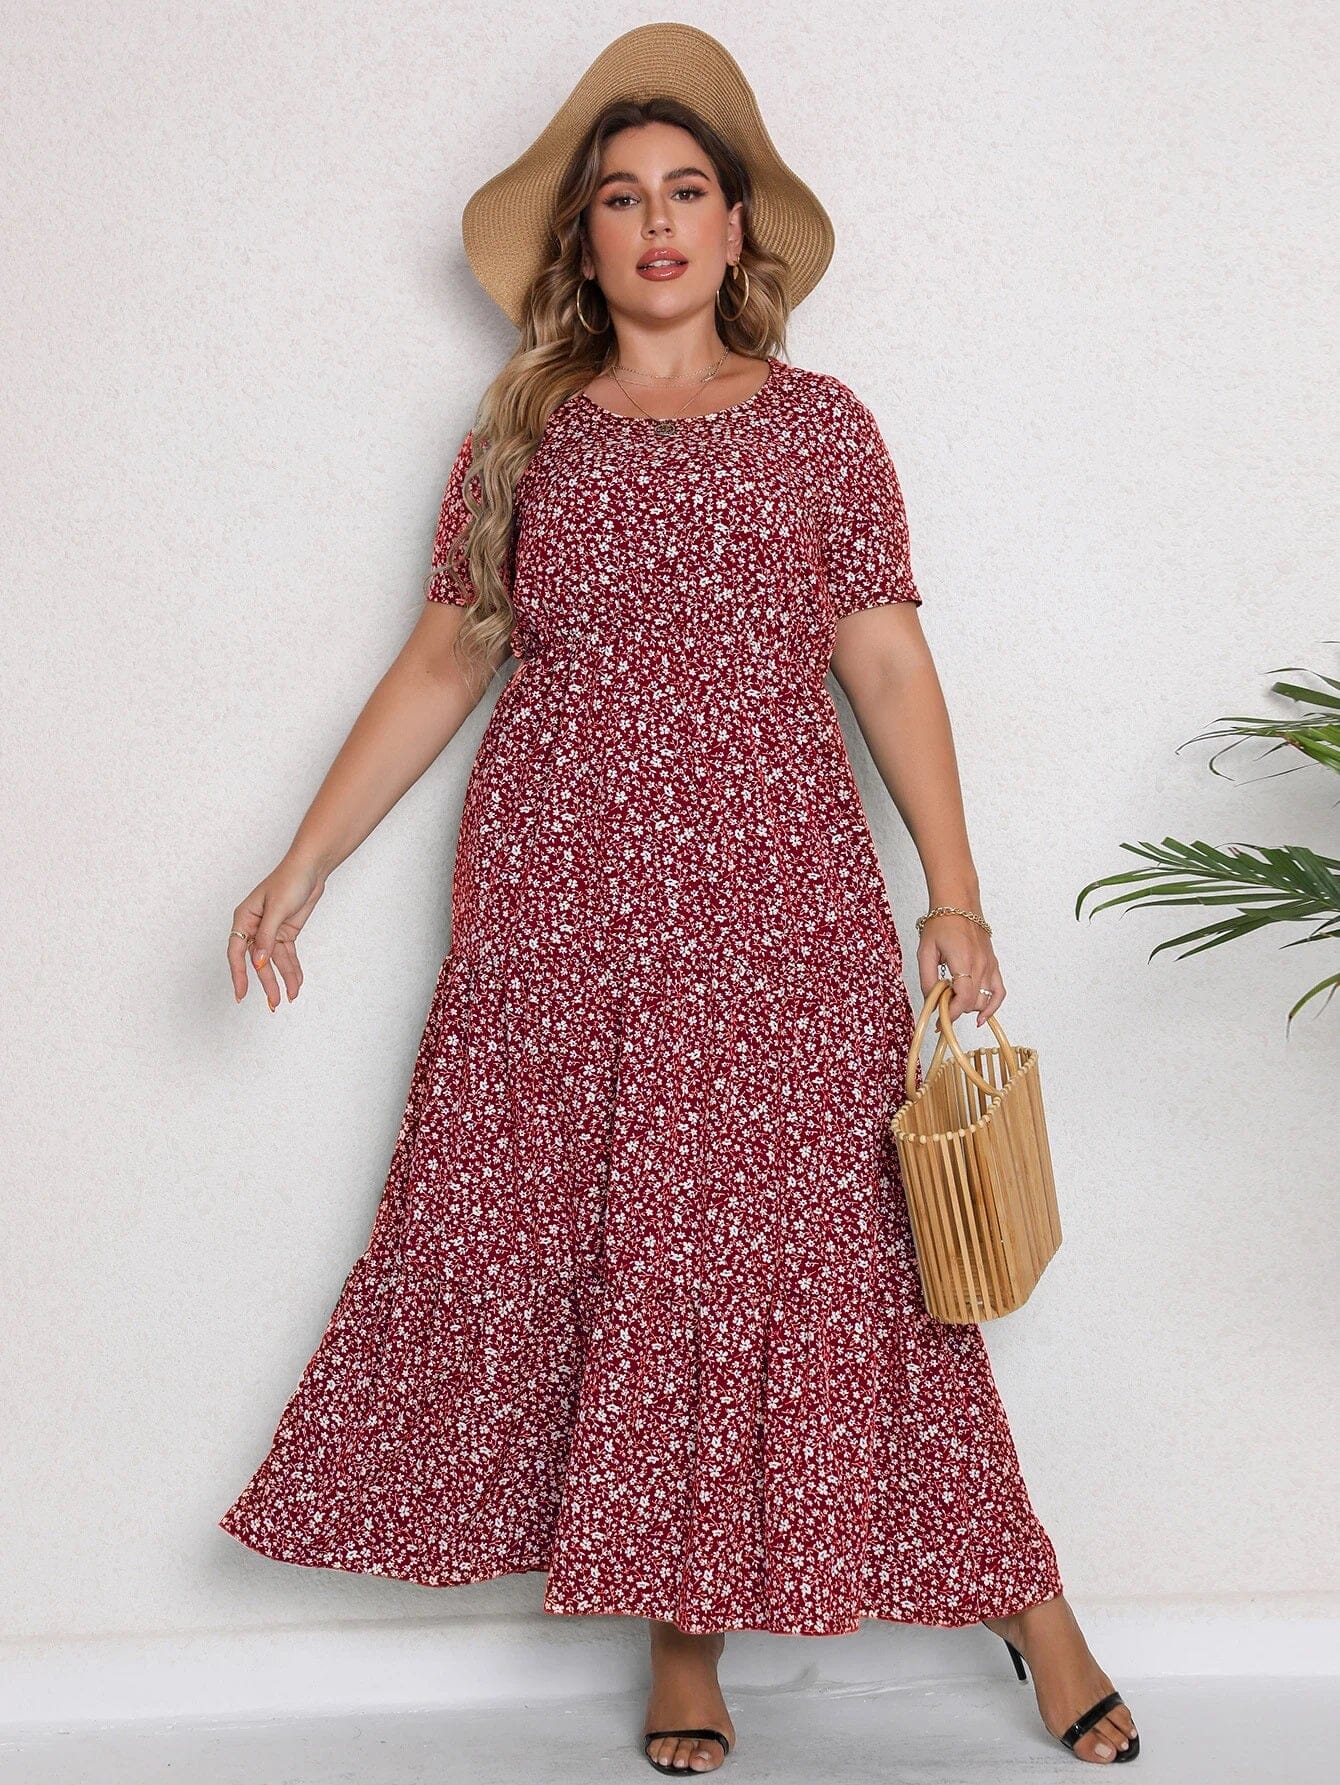 Women Plus Size Casual Flowy Holiday Beach Loose Short Sleeve Ditsy Printed Dress Dresses jehouze Red XL 